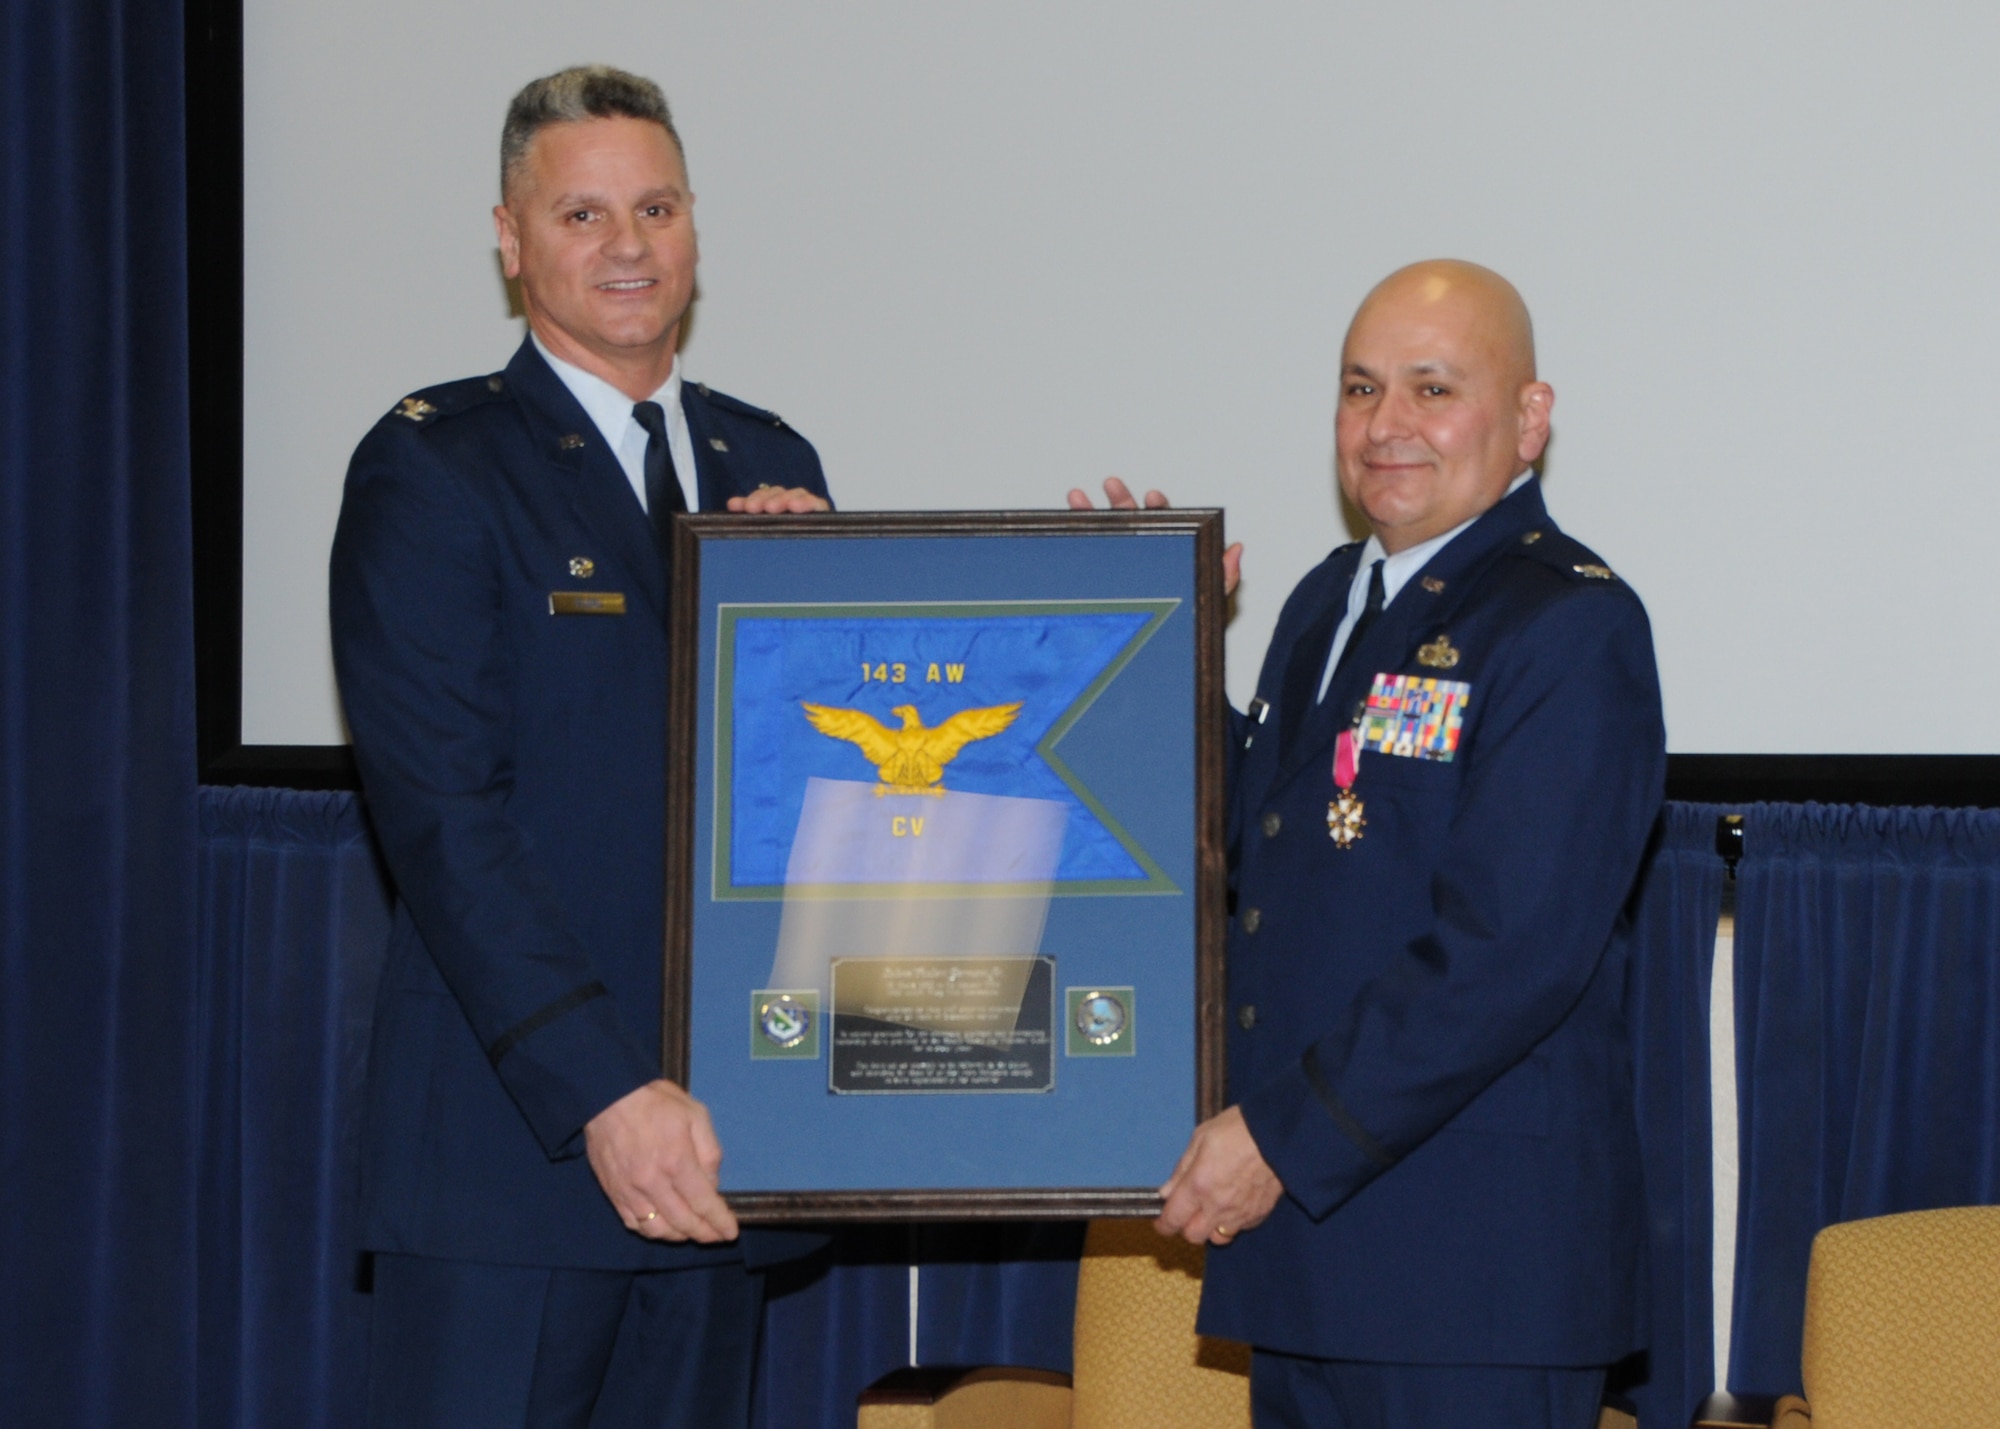 Colonel Arthur Floru (right), 143d Airlift Wing Commander, presents Colonel Robert Germani Jr. (left), outgoing 143d Airlift Wing Vice Commander witha replica of the 143d Airlift Wing Guidon upon his retirement after 34 years of dedicated service to the Rhode Island National Guard. National Guard Photo by Technical Sgt Jason Long (RELEASED)